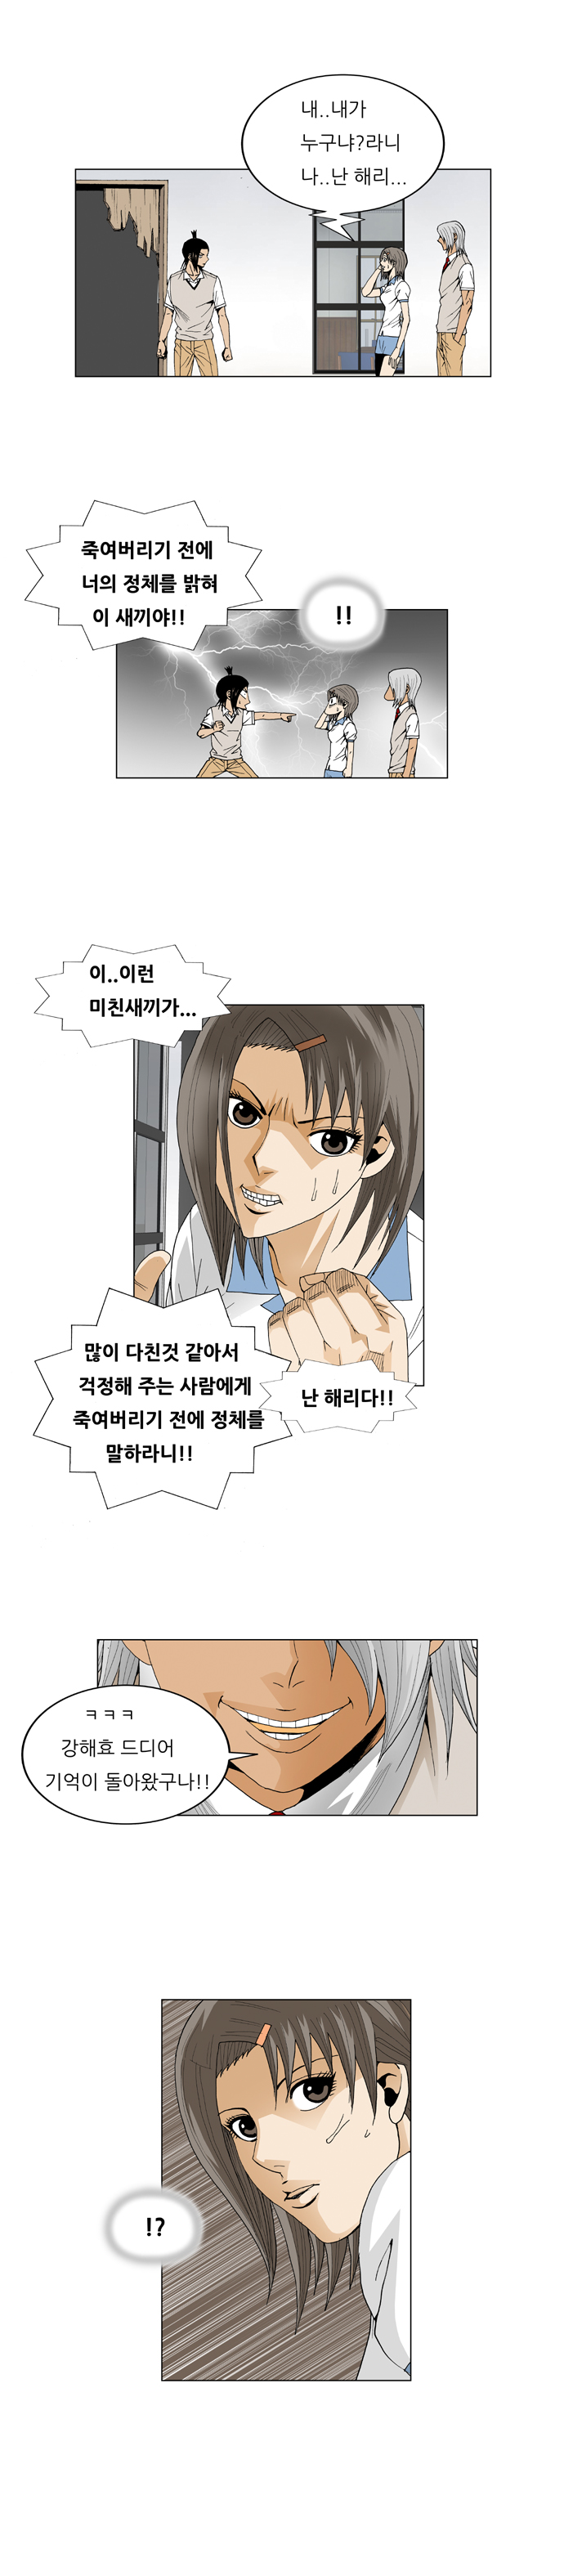 Ultimate Legend - Kang Hae Hyo - Chapter 52 - Page 3